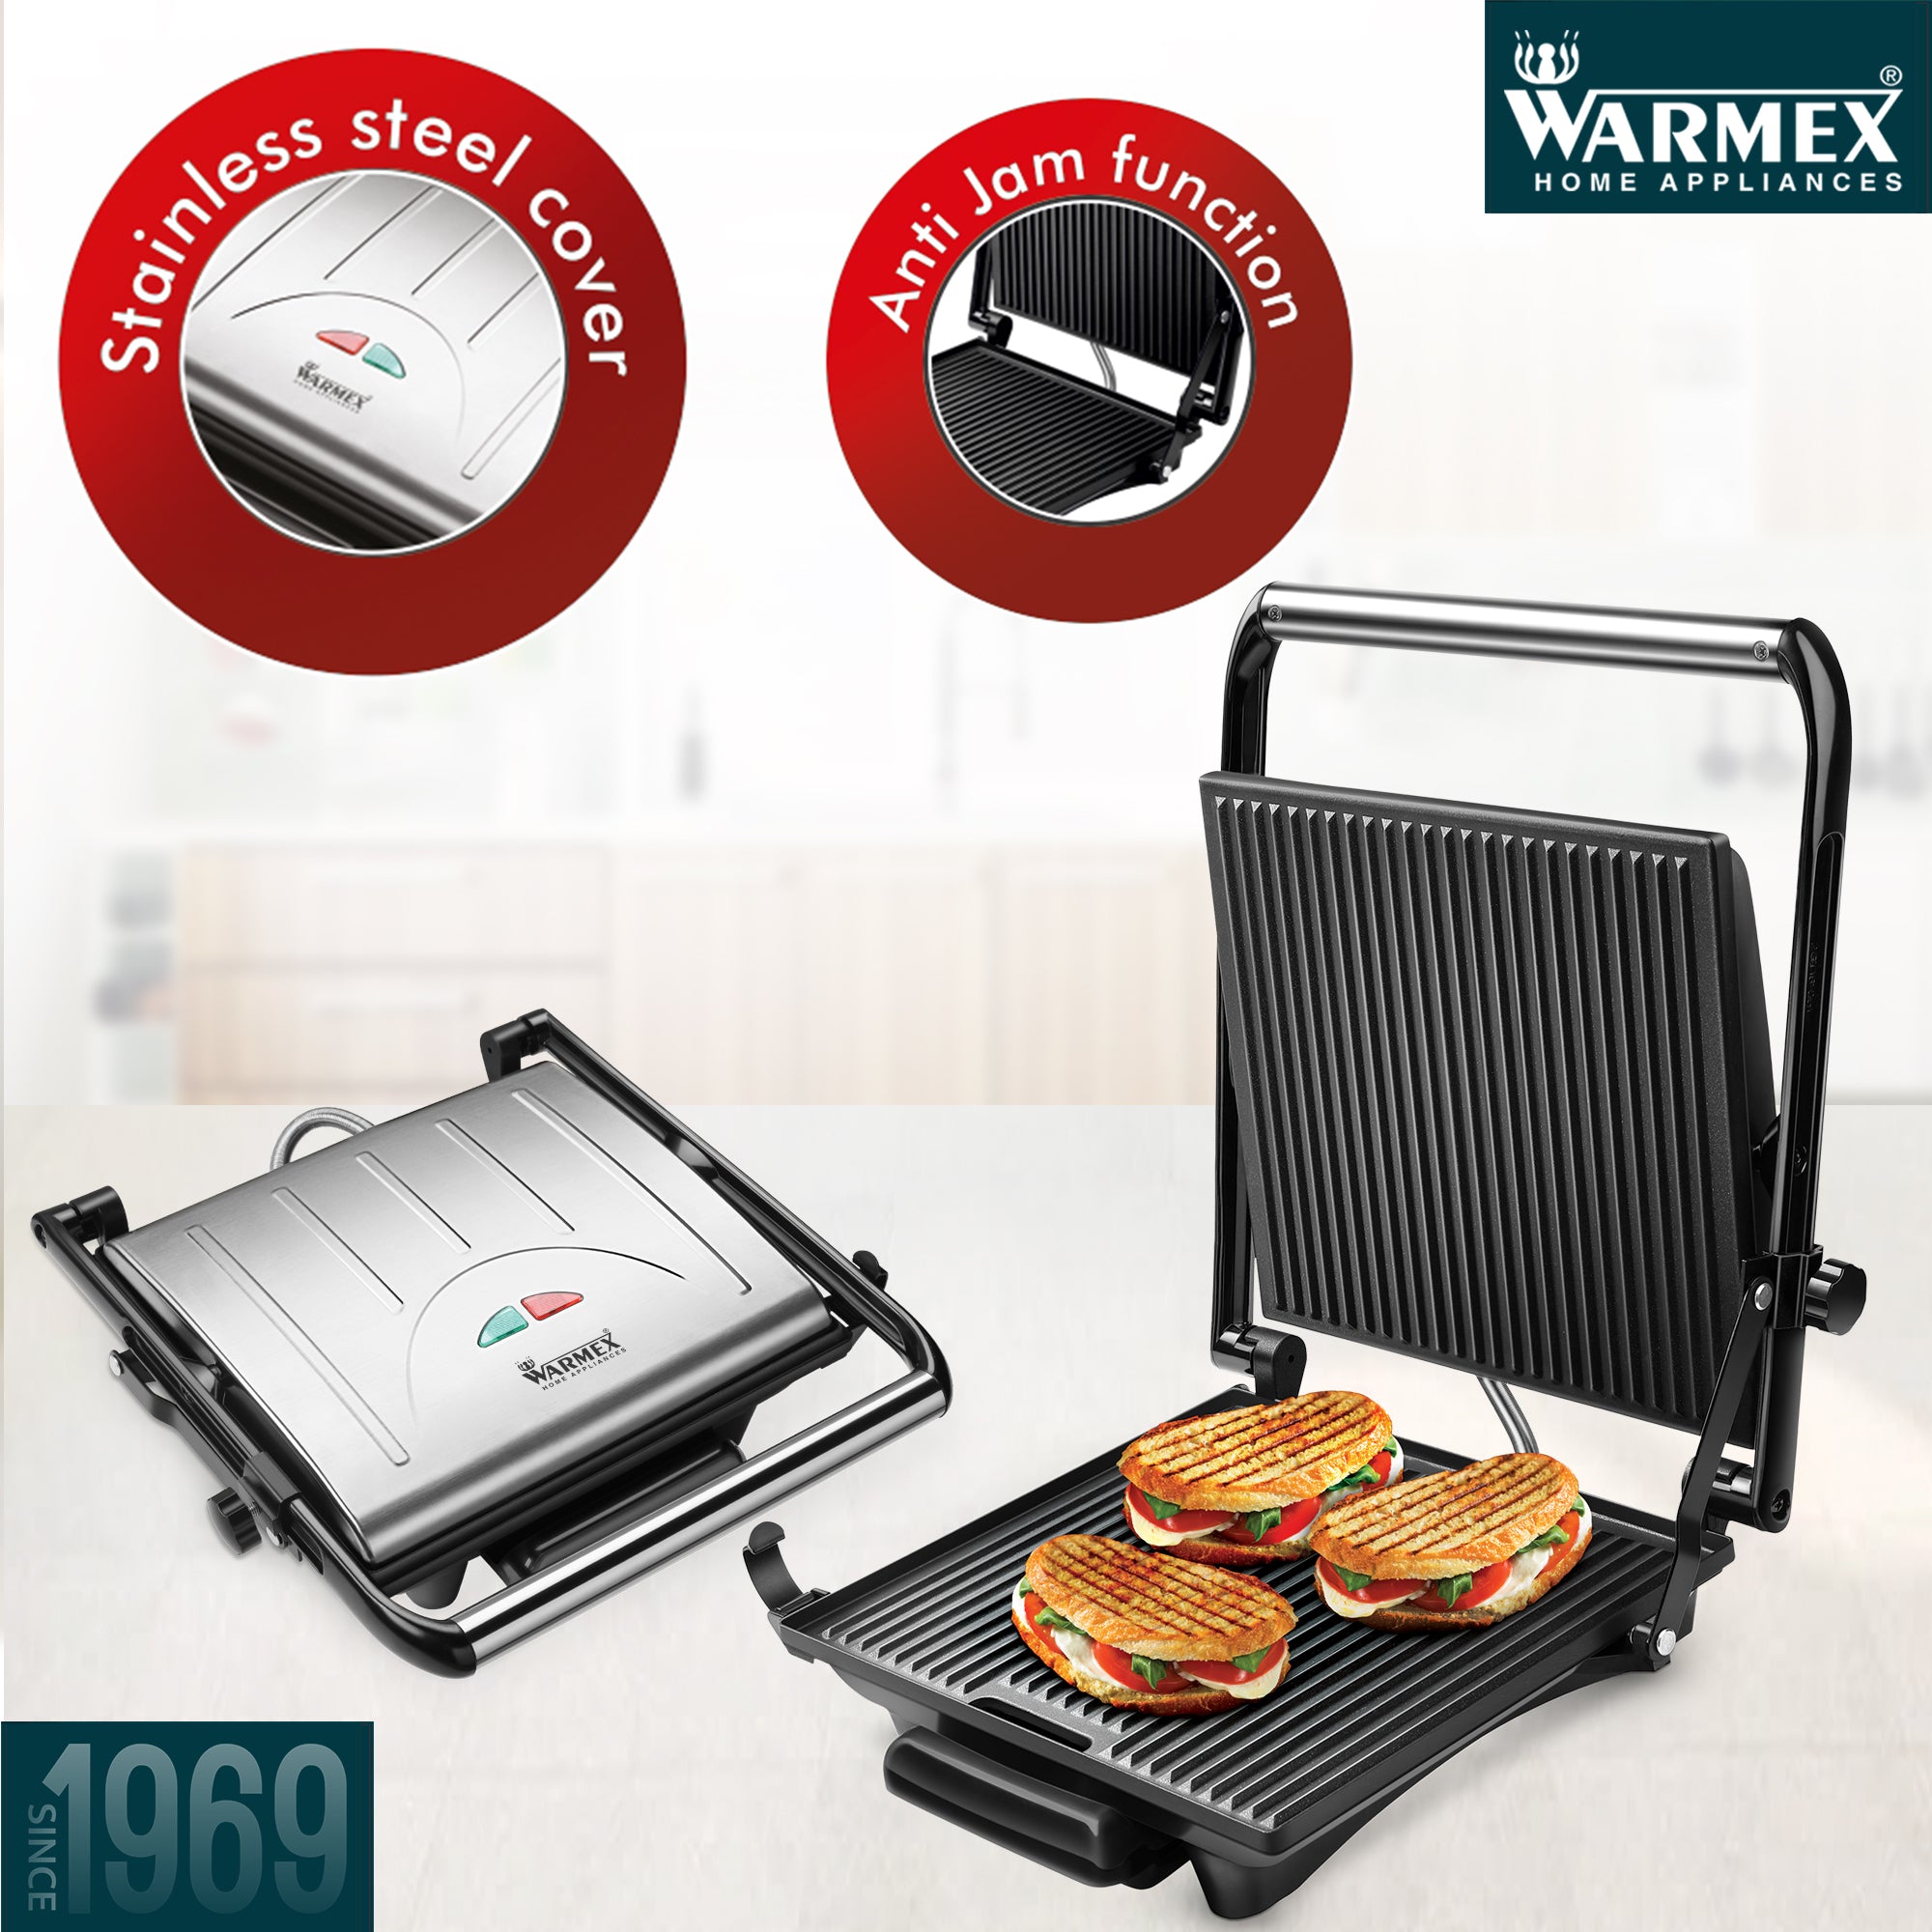 Warmex Home Appliances Grill Master with 90° Rotation